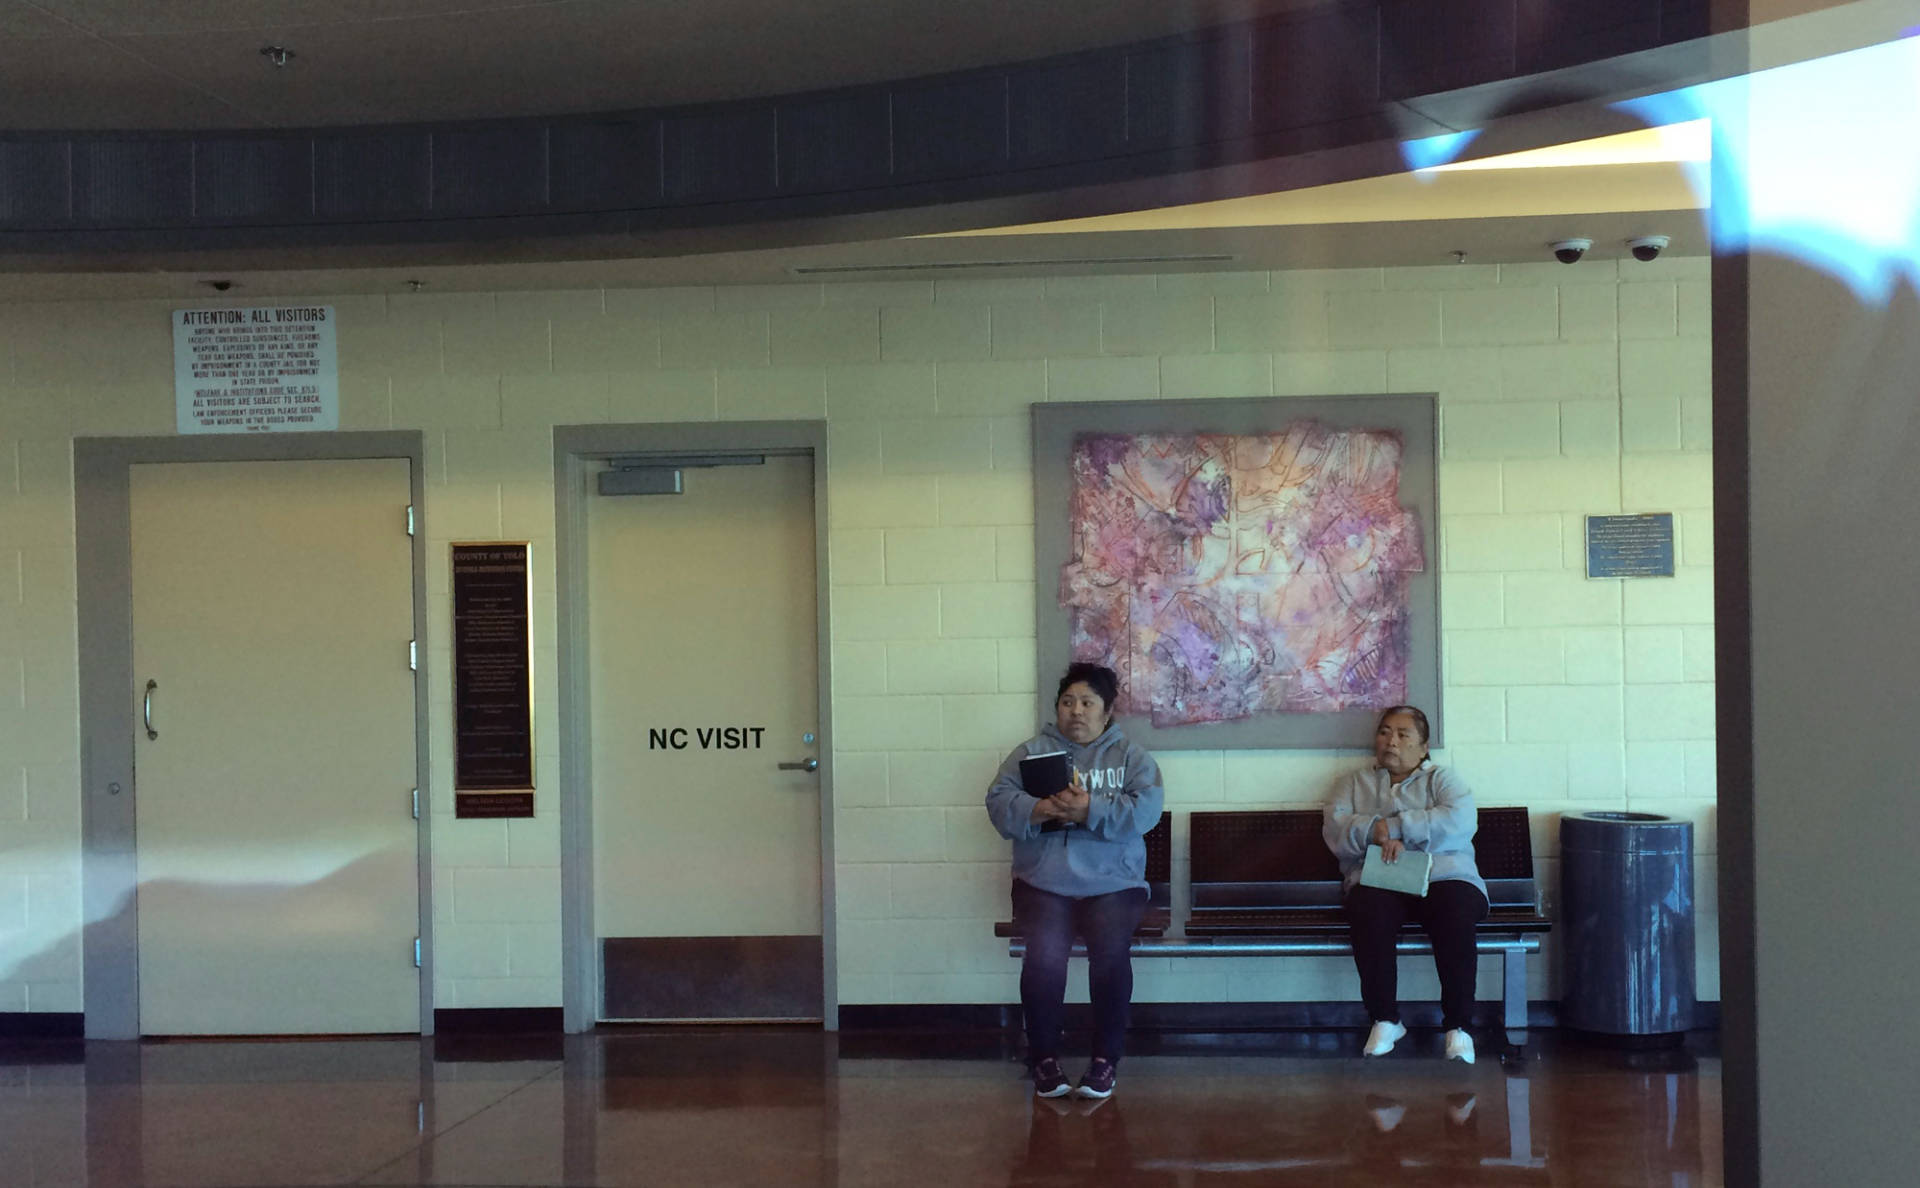 Pablo Aguilar's mother, Evelyn, and grandmother, Albertina, wait in the lobby of the Yolo County Juvenile Detention Facility to visit Pablo, who has been locked in confinement by the Office of Refugee Resettlement since June of 2014. Tyche Hendricks/KQED